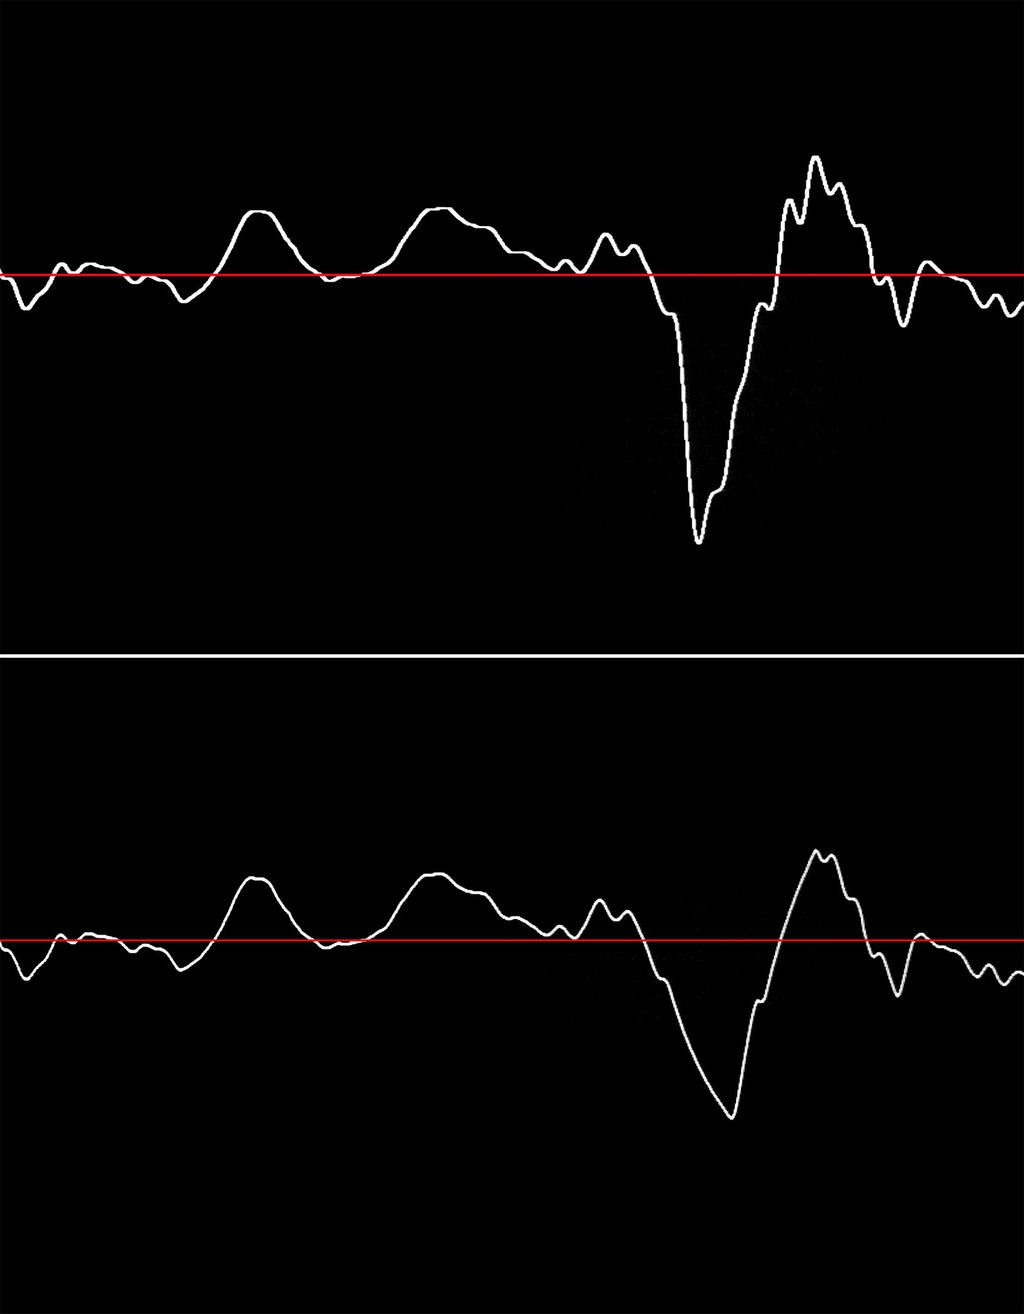 The top wave shape is a vocal recoding The bottom is the same slowed down by